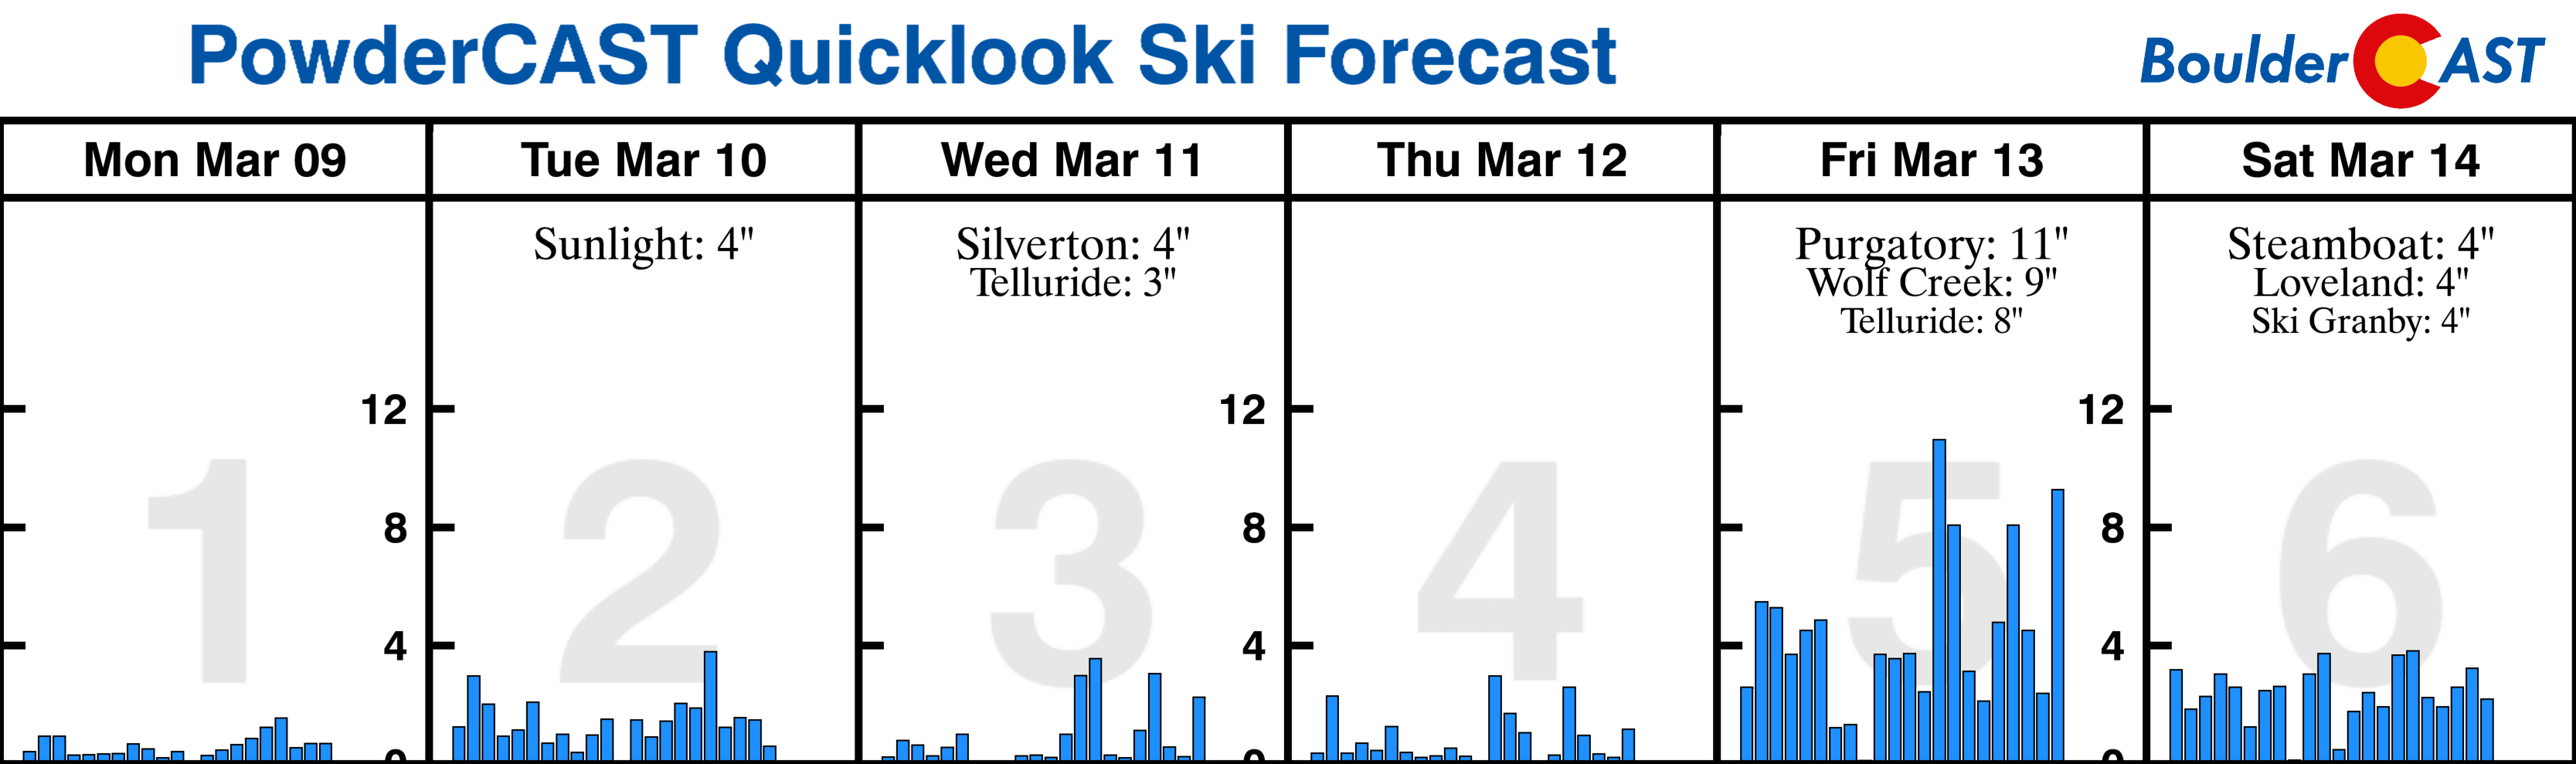 This week in Colorado weather March 9, 2020 BoulderCAST